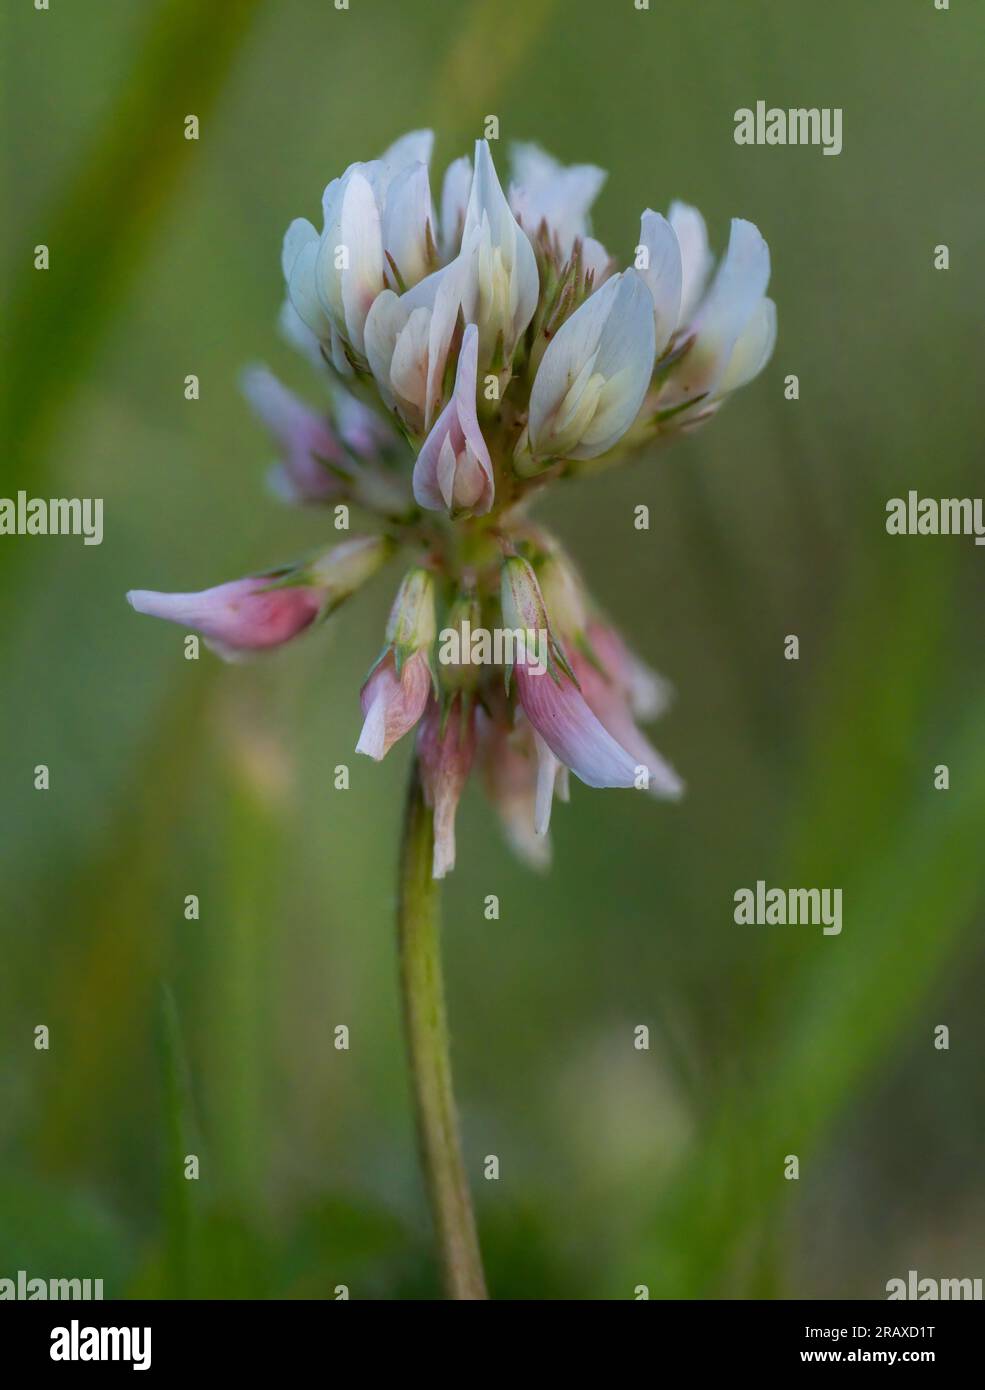 Close up of the flower head of a White Clover (Trifolium repens) Stock Photo